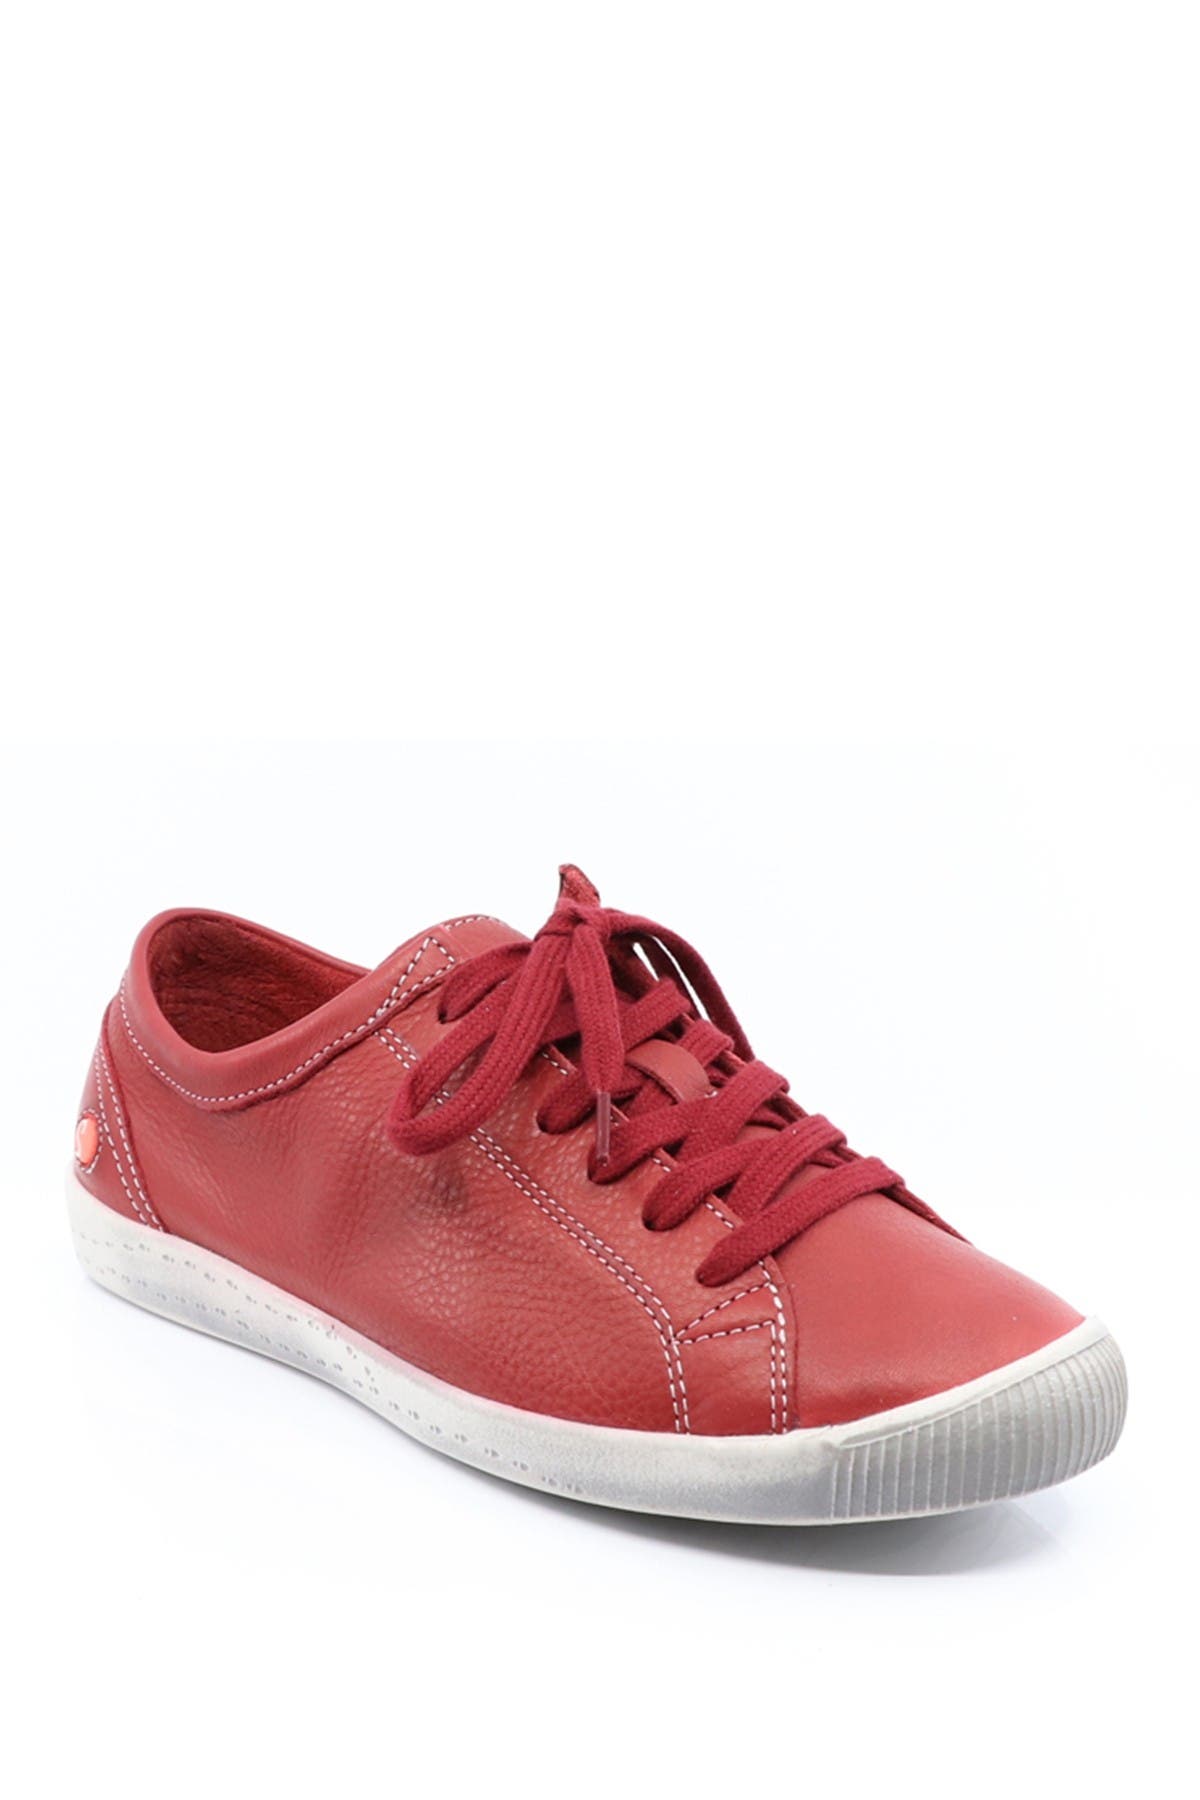 Softinos By Fly London Isla Distressed Sneaker In 554 Red Washed Leath